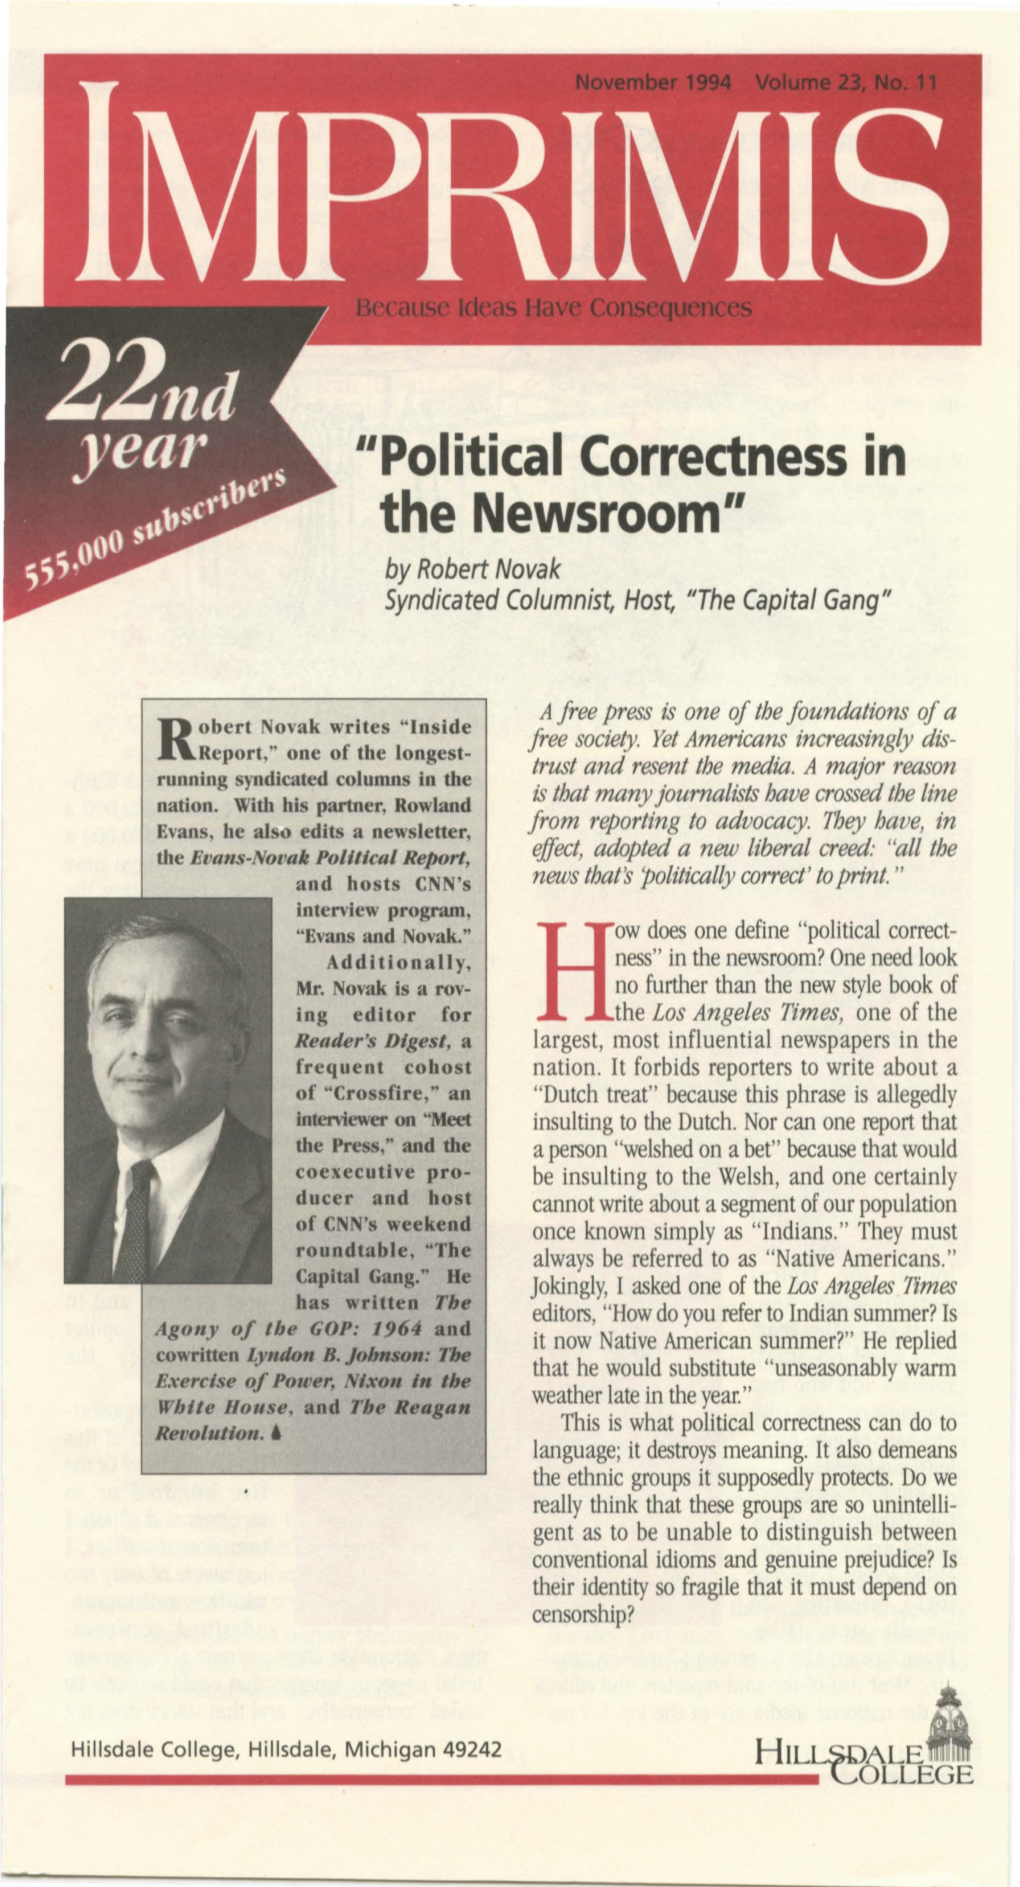 "Political Correctness in the Newsroom" by Robert Novak Syndicated Columnist, Host, "The Capital Gang"